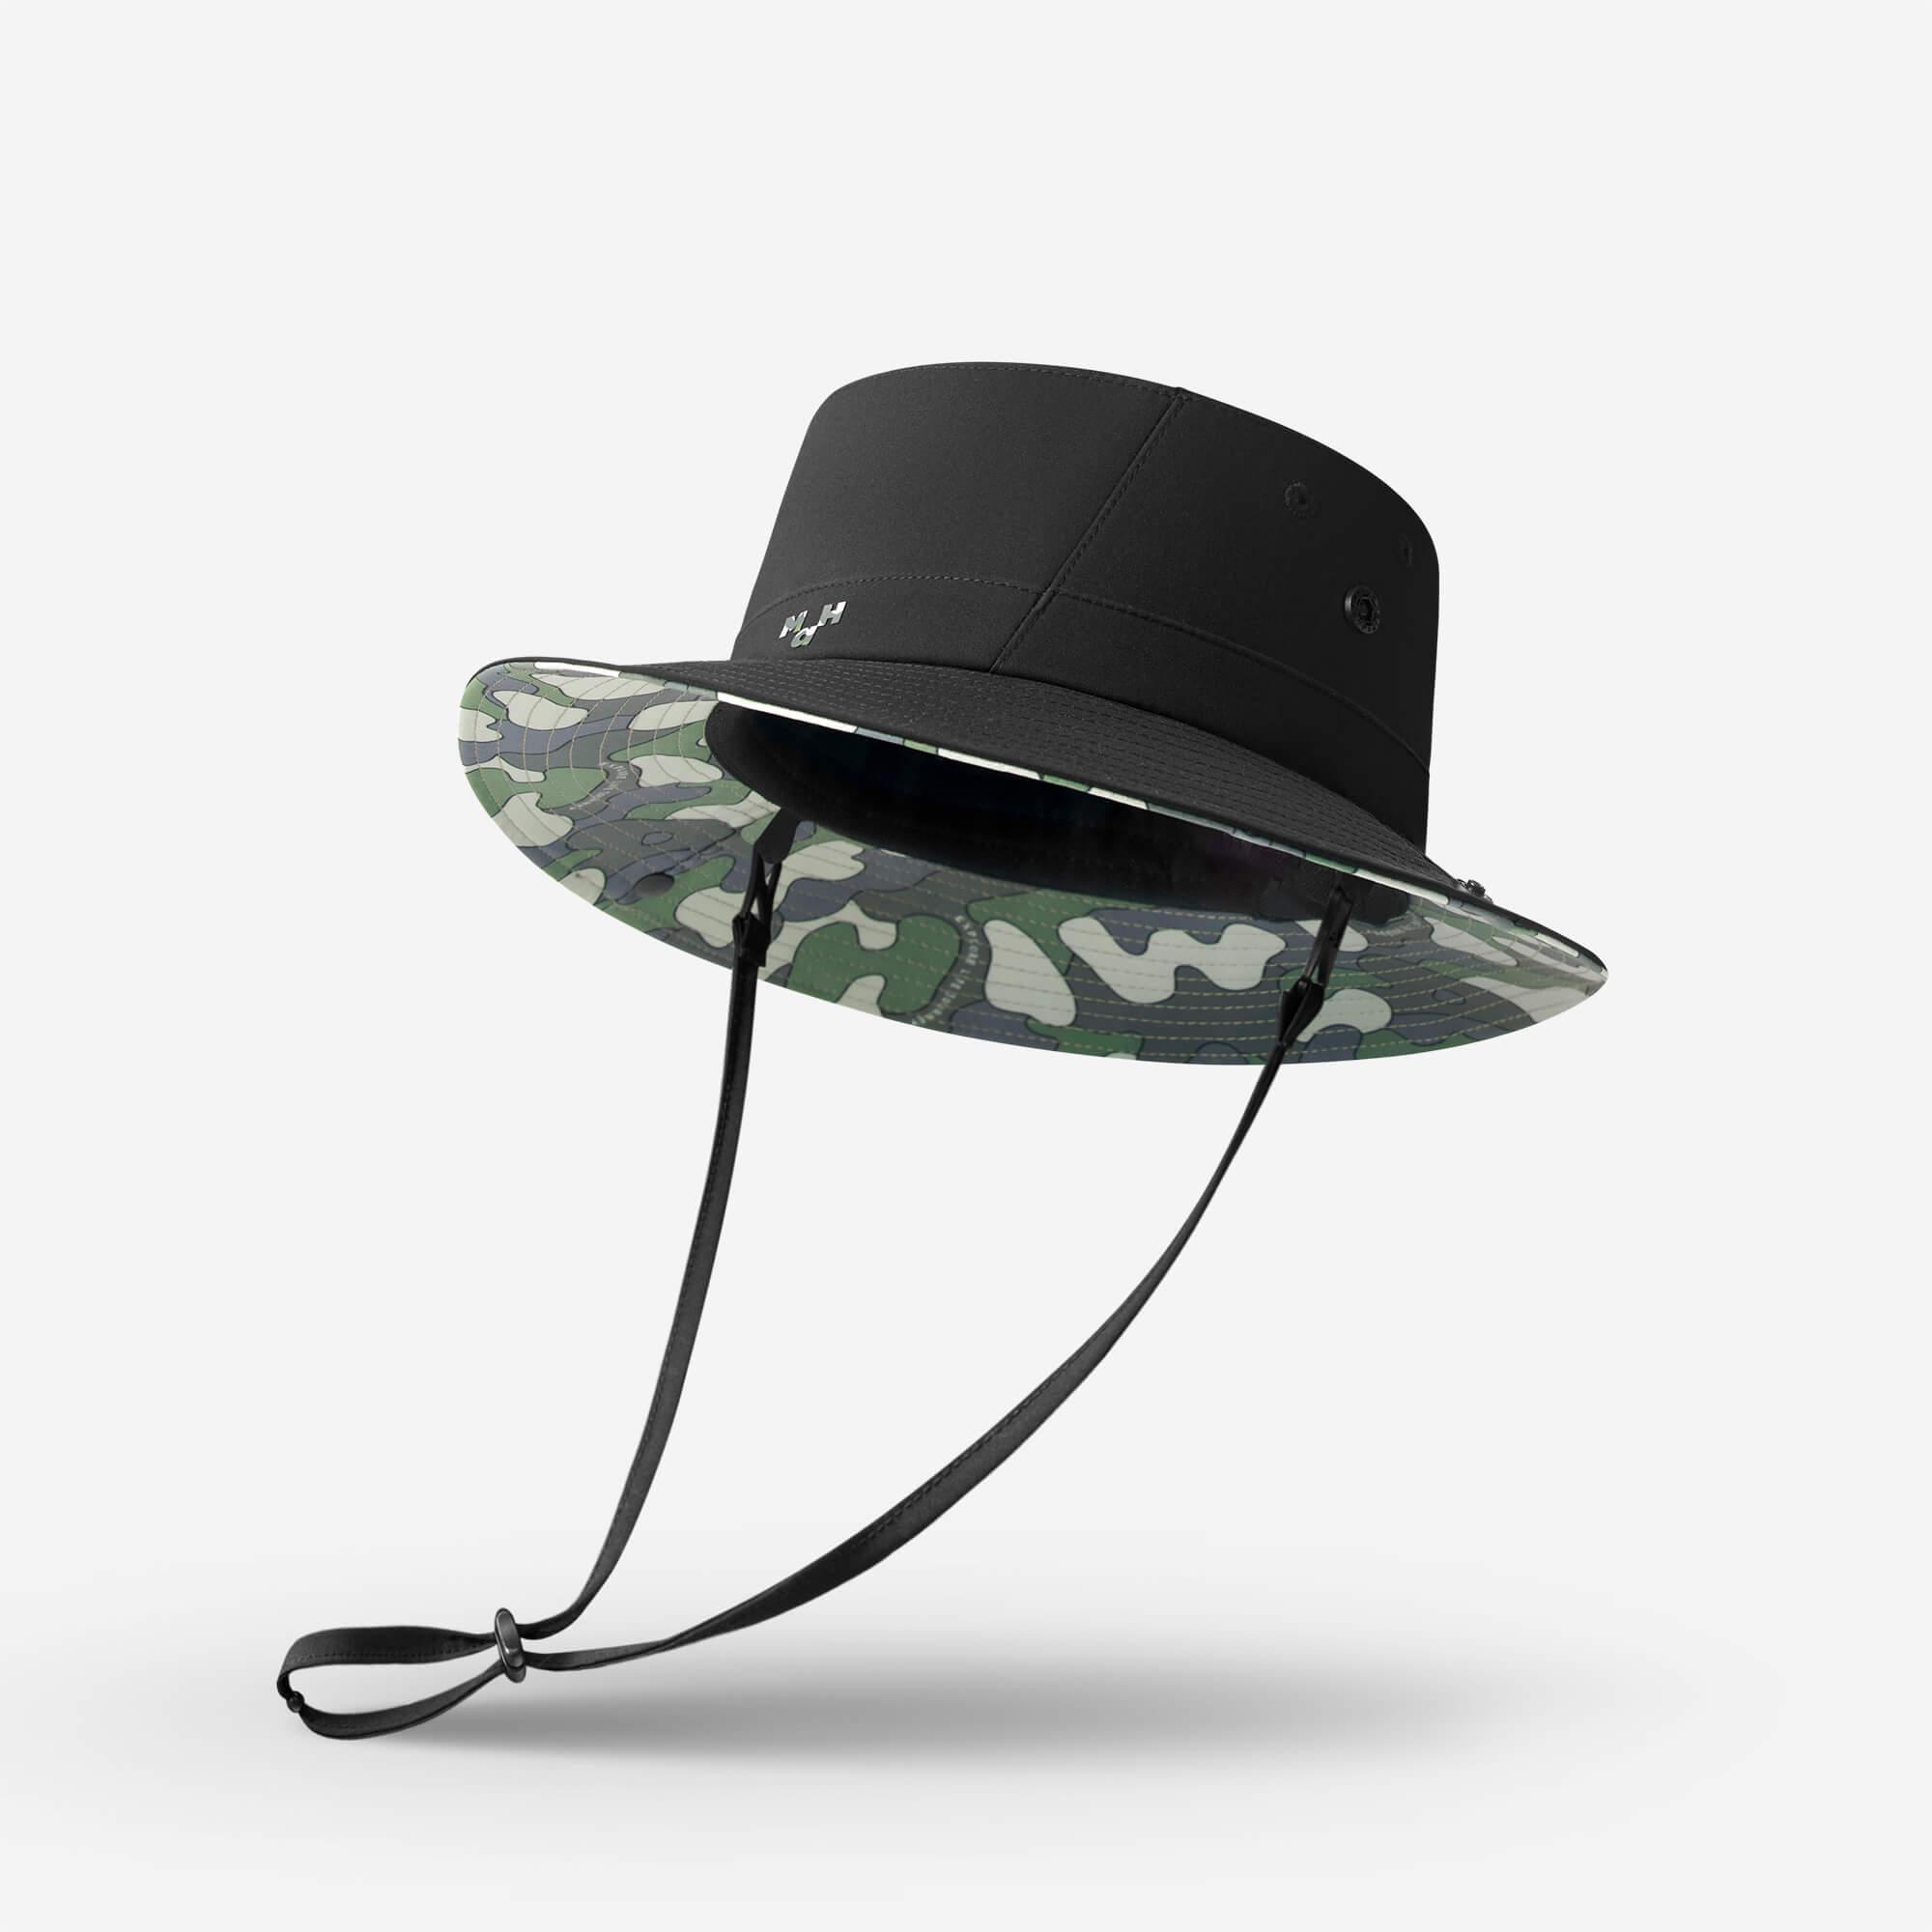 Camouflage Sun Hat - Printing Hat For Summer